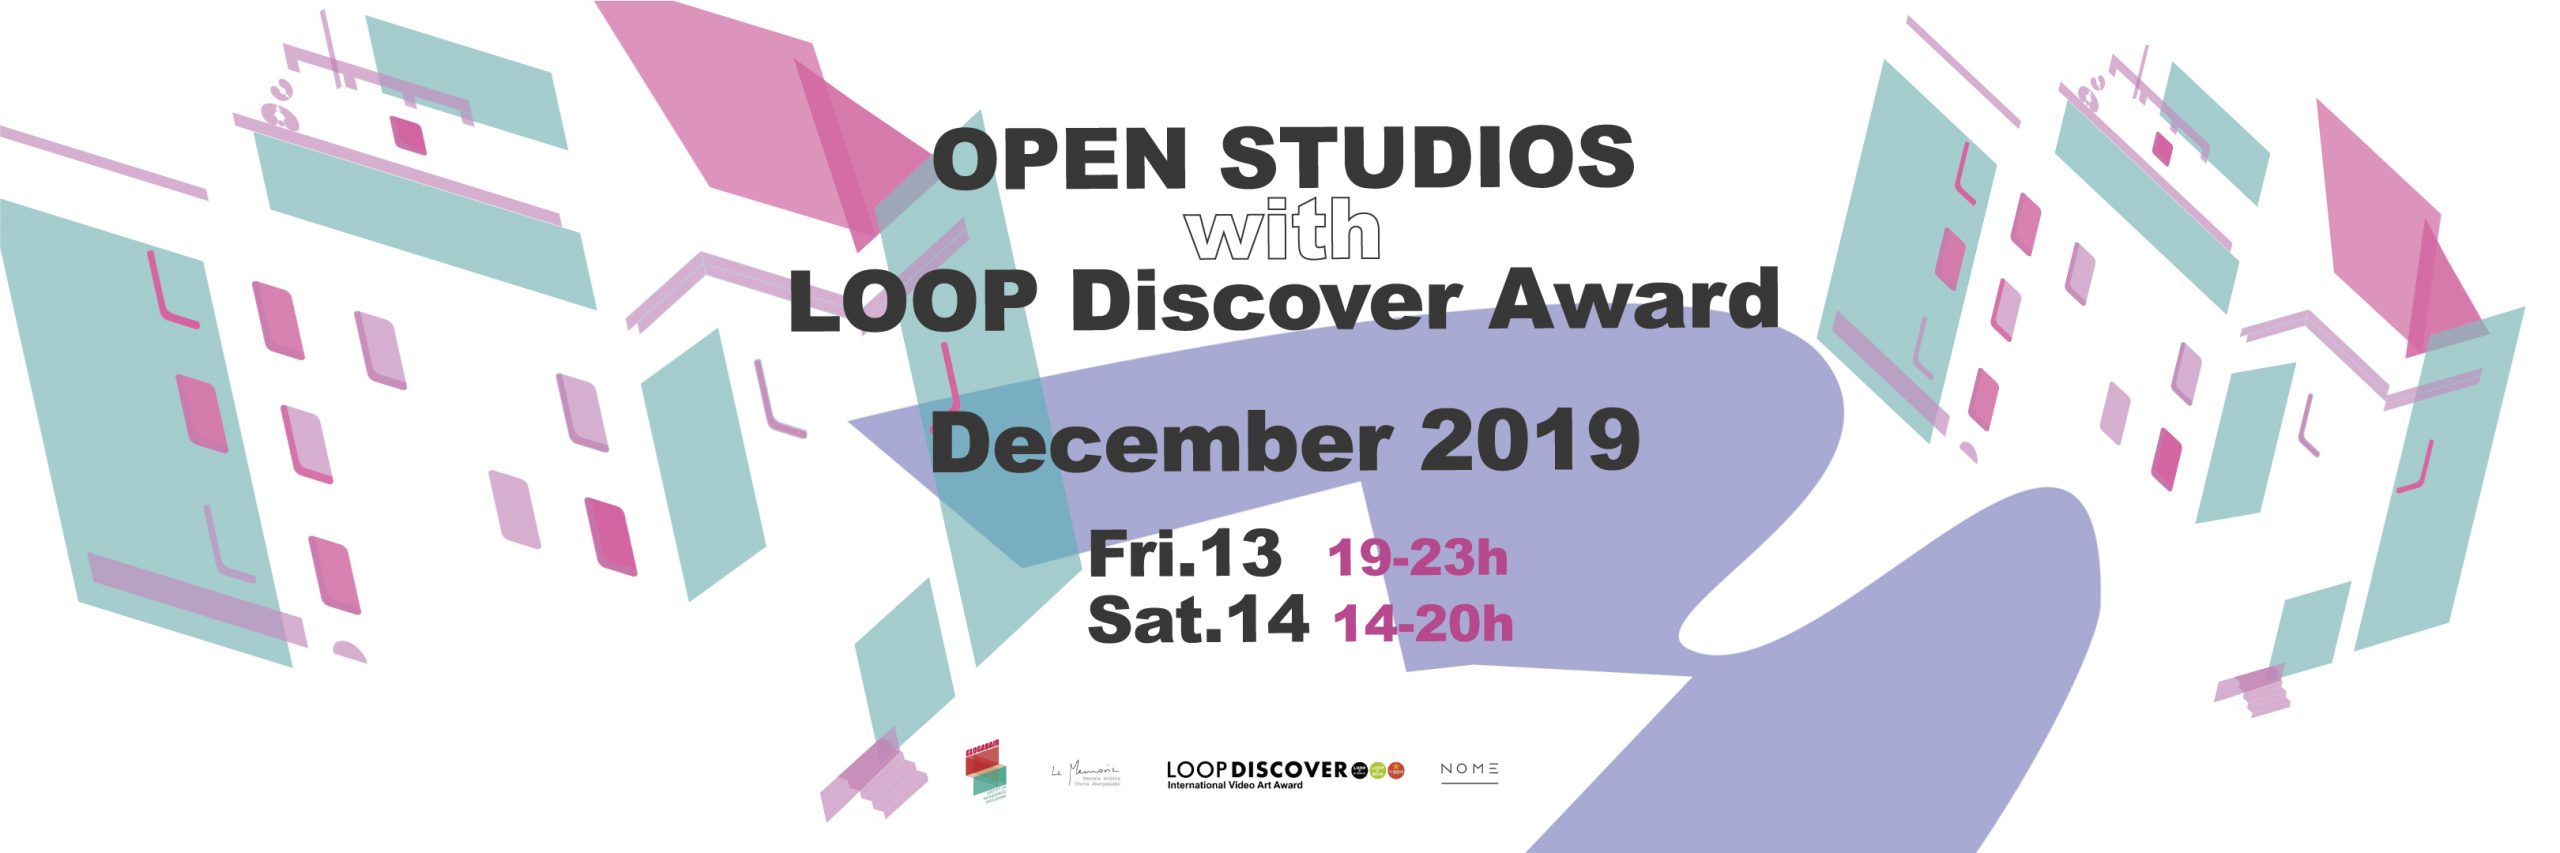 Open Studios December 2019 with LOOP Discover video art awards from Barcelona